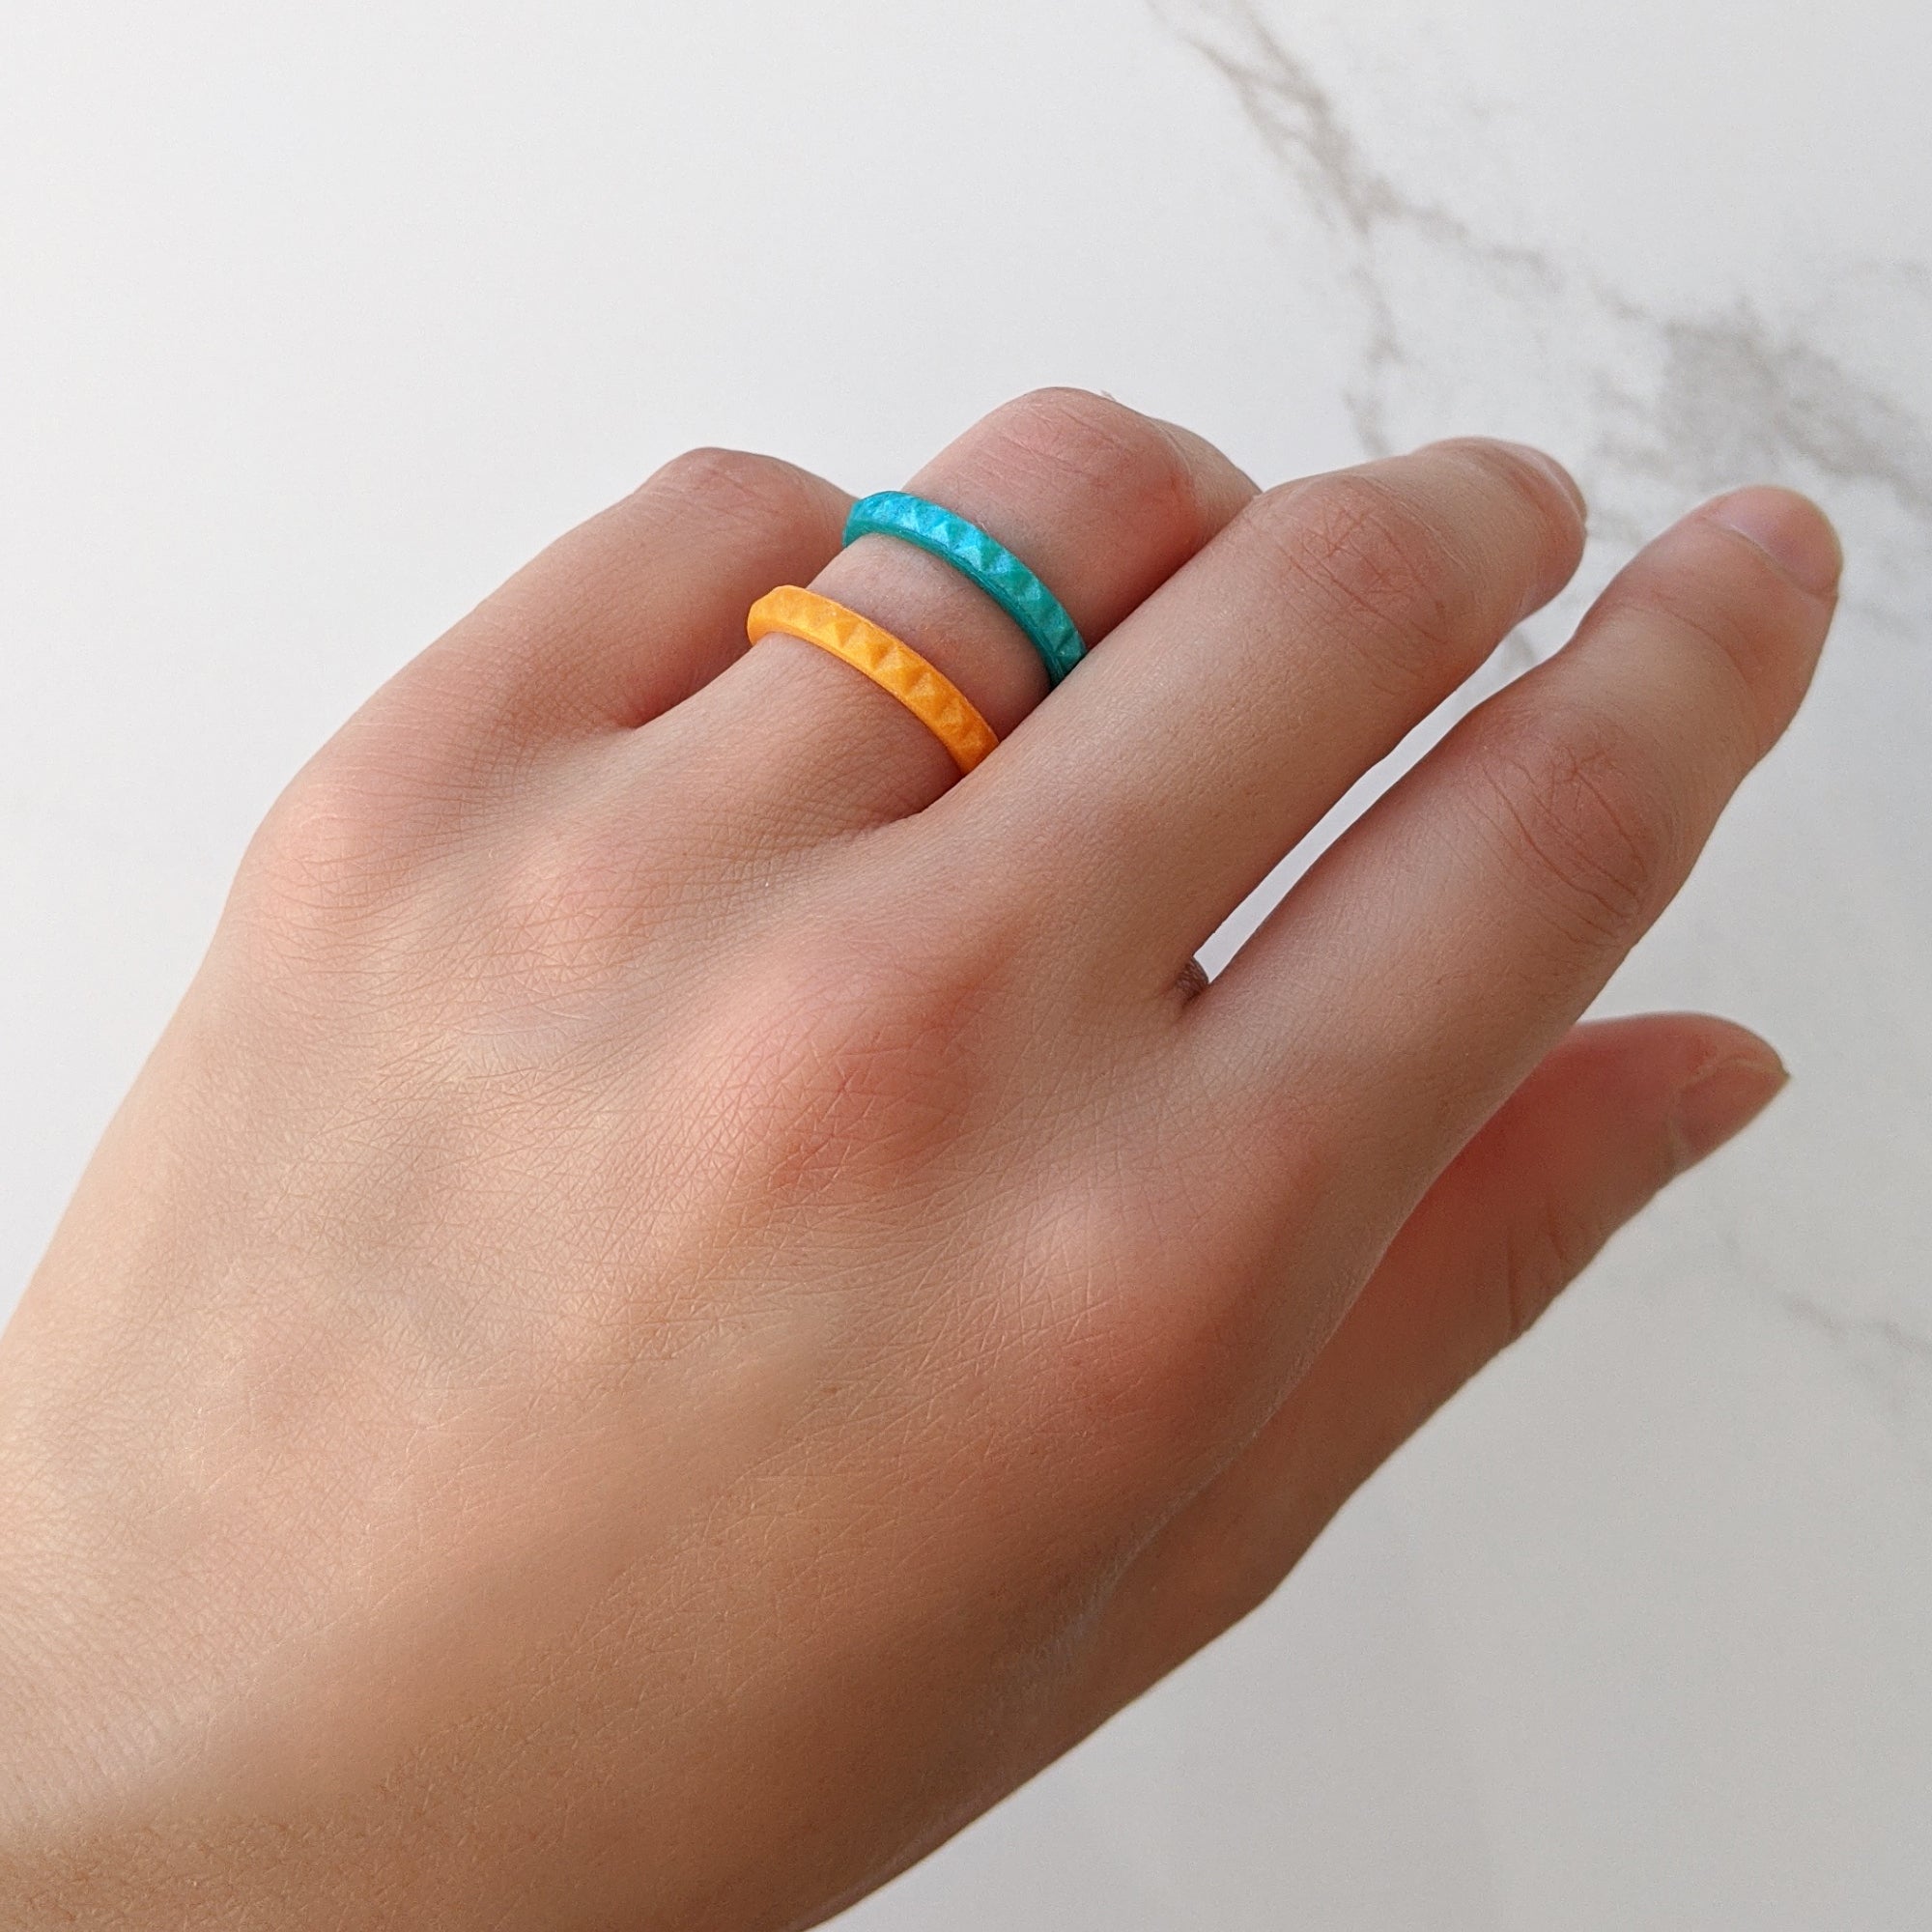 Pearl Orange Pyramid Stackable Slim Thin Silicone Ring for Women - Knot Theory